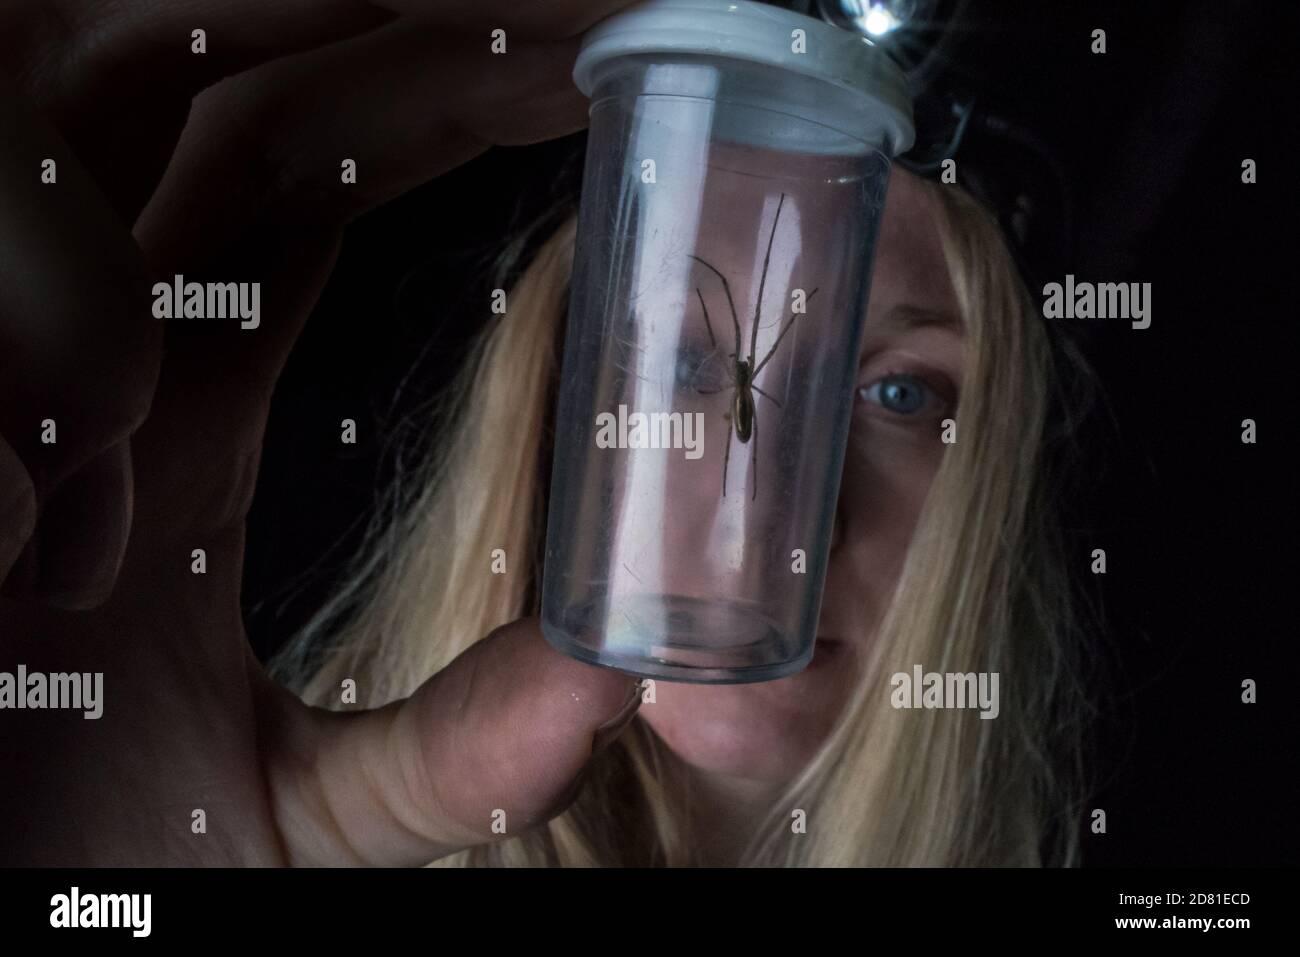 A scientist examines a captured spider in a jar as part of a scientific study Stock Photo